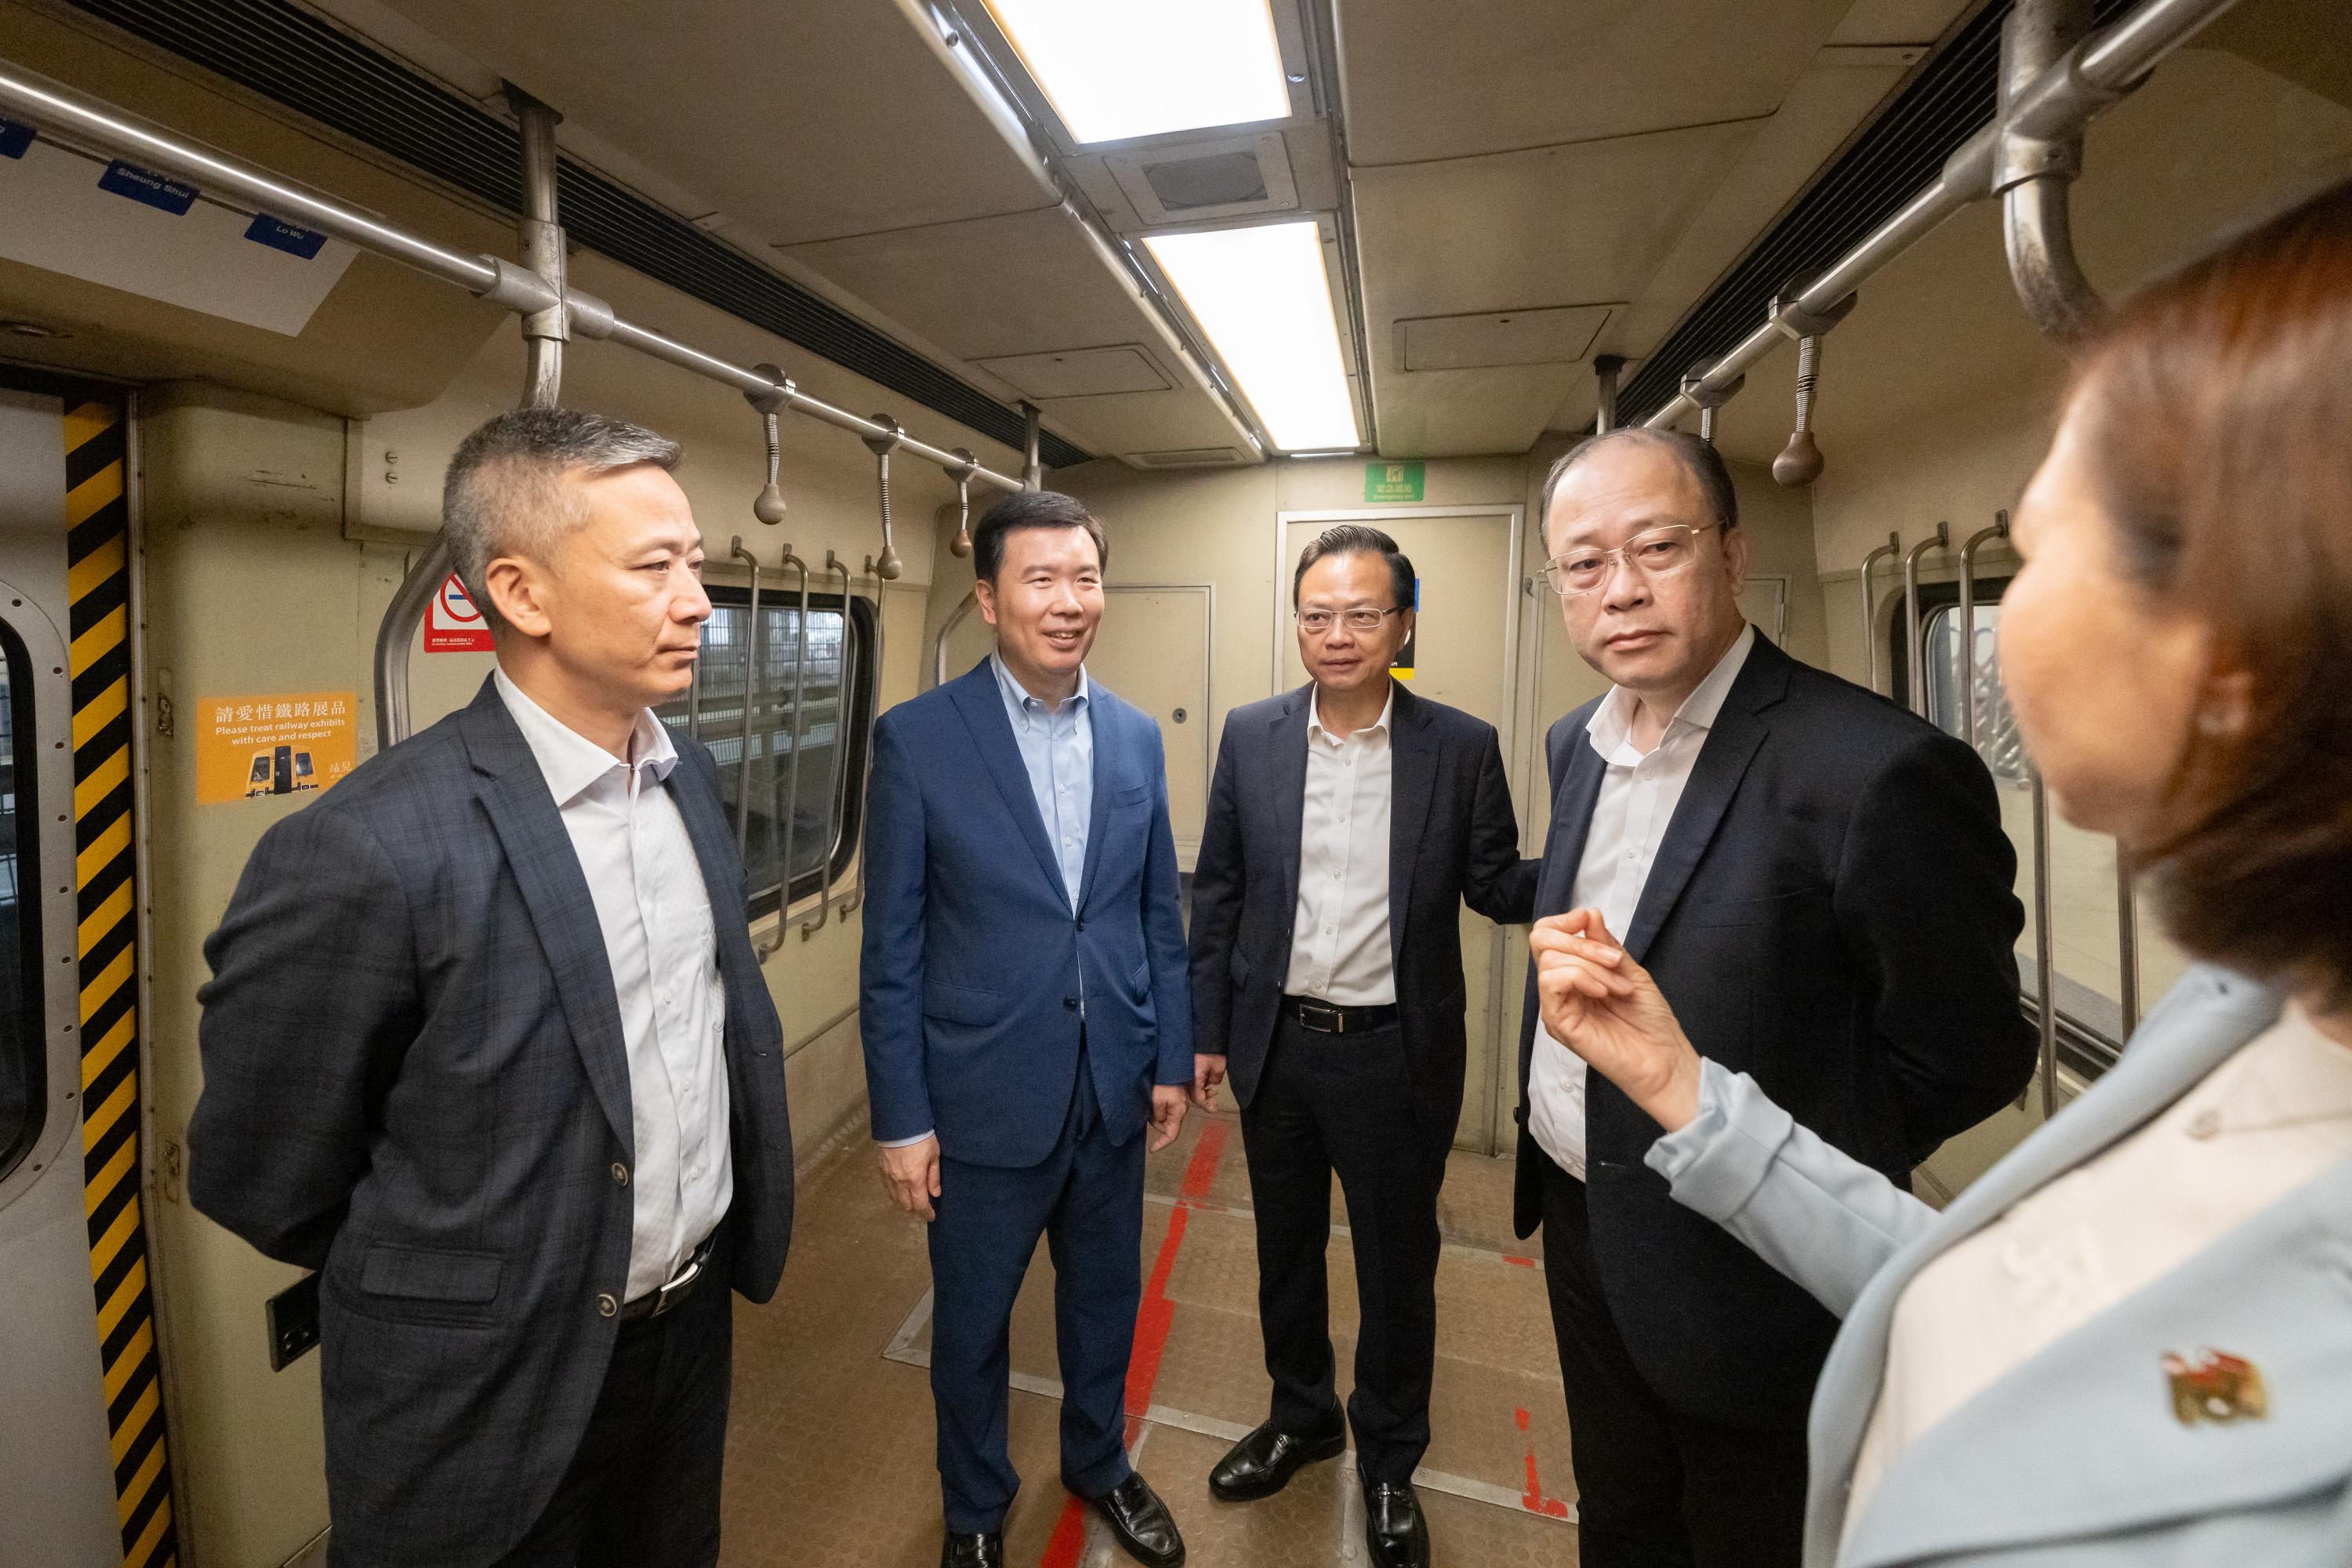 The Legislative Council (LegCo) Panel on Transport visited the "Station Rail Voyage" Exhibition of the MTR Corporation Limited at Hung Hom Station today (April 24).  Photo shows LegCo Members visiting the first-generation electric train "Yellow Head".